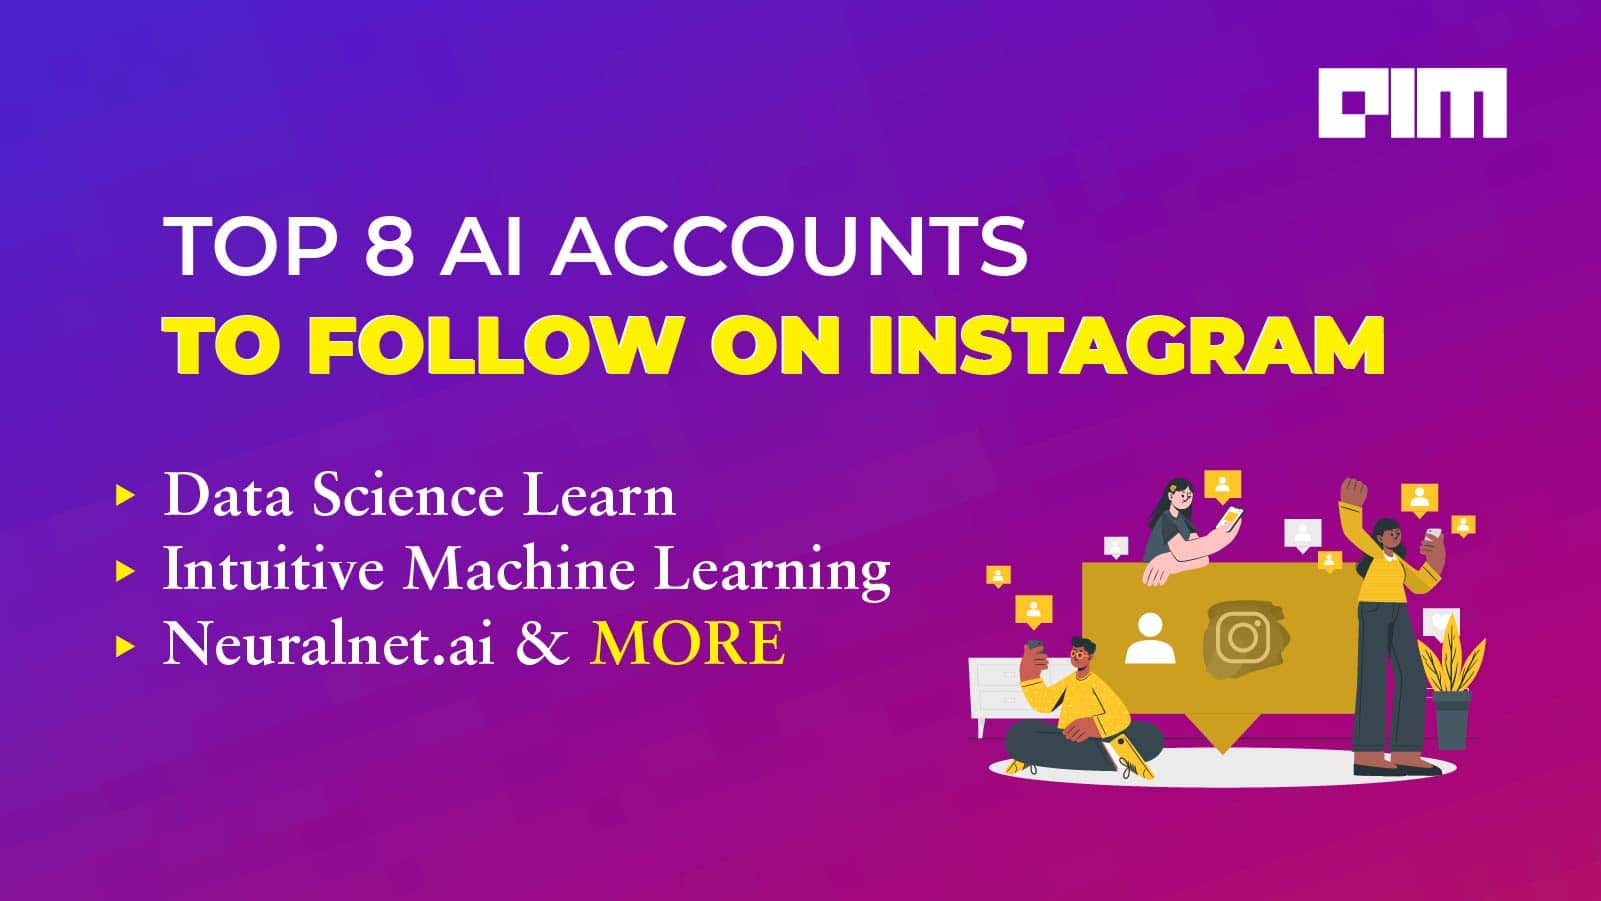 Top 8 AI Influencers To Follow On Instagram